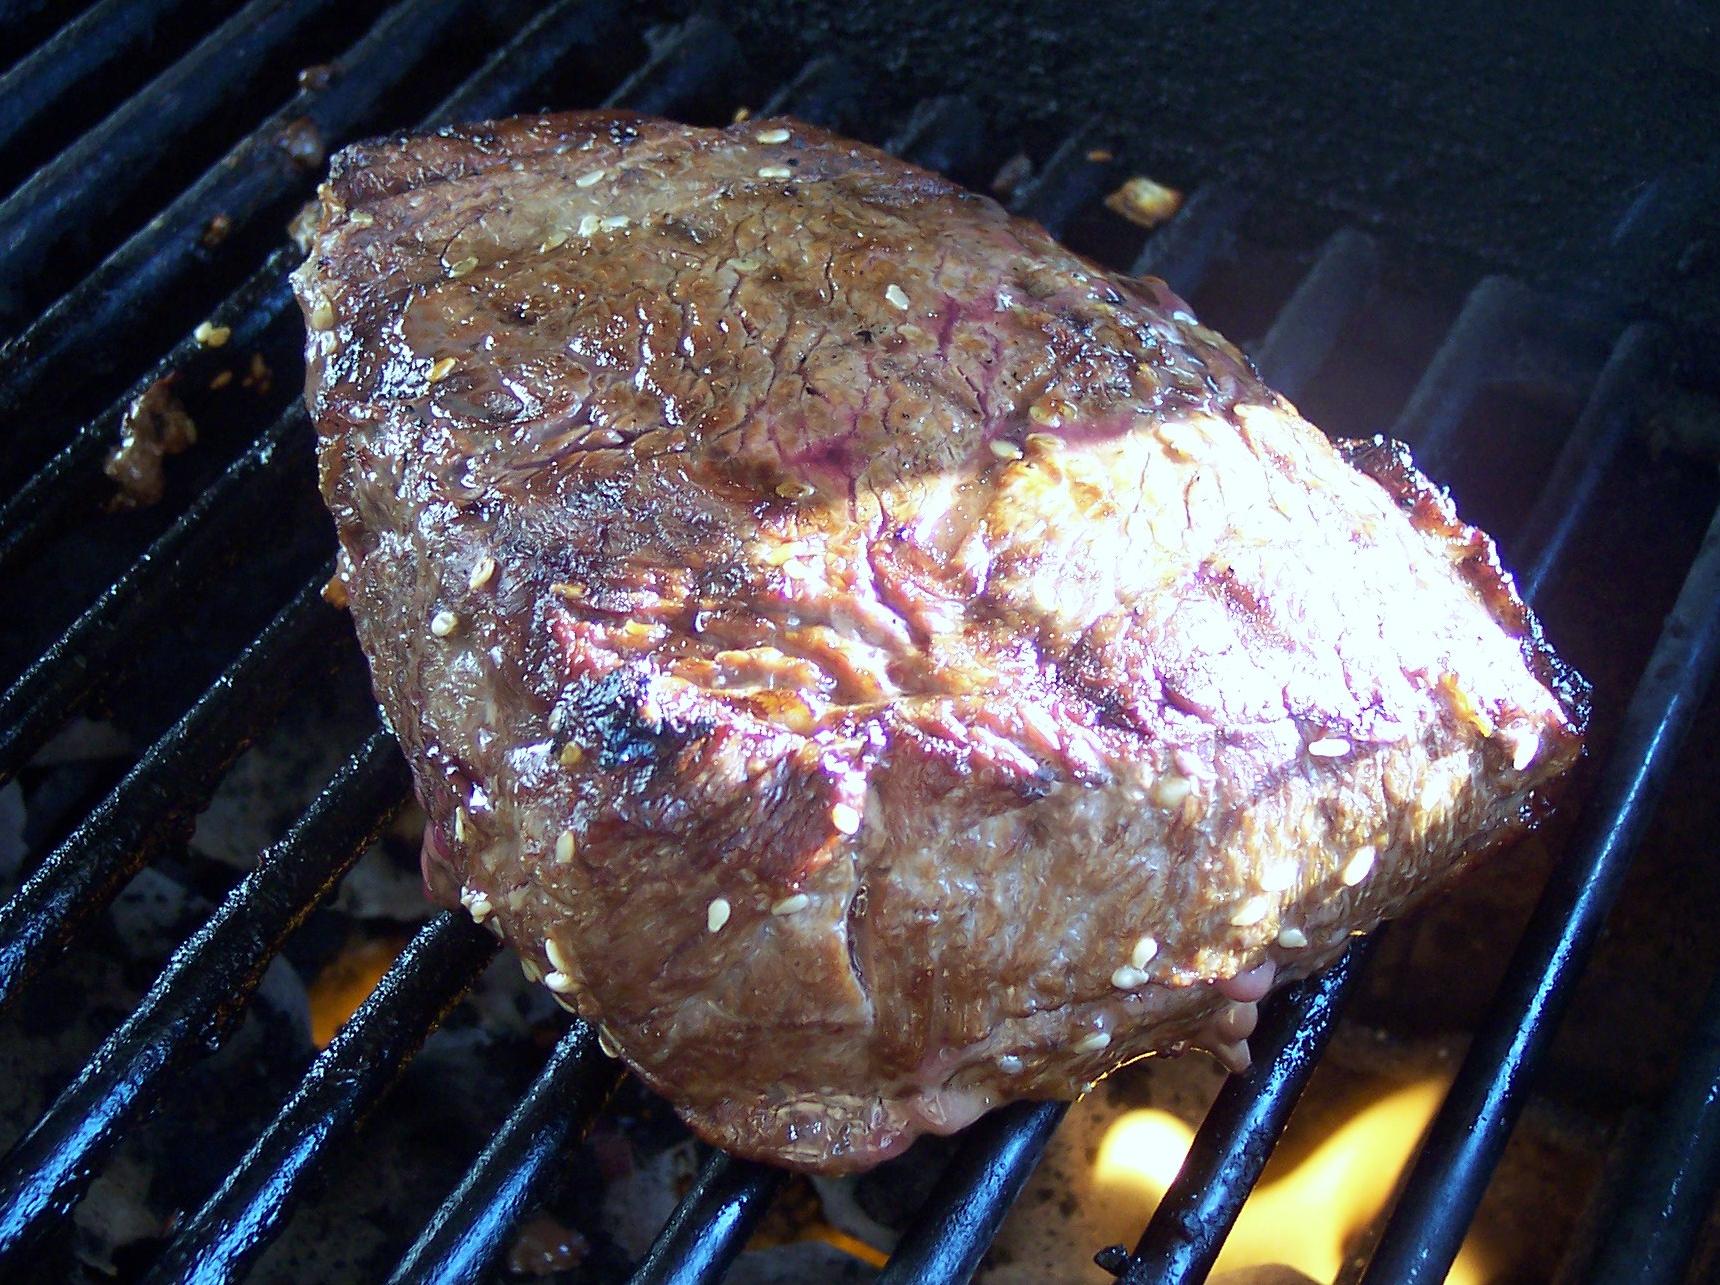  Get ready for a flavor explosion with our Coffee Marinated Steak!